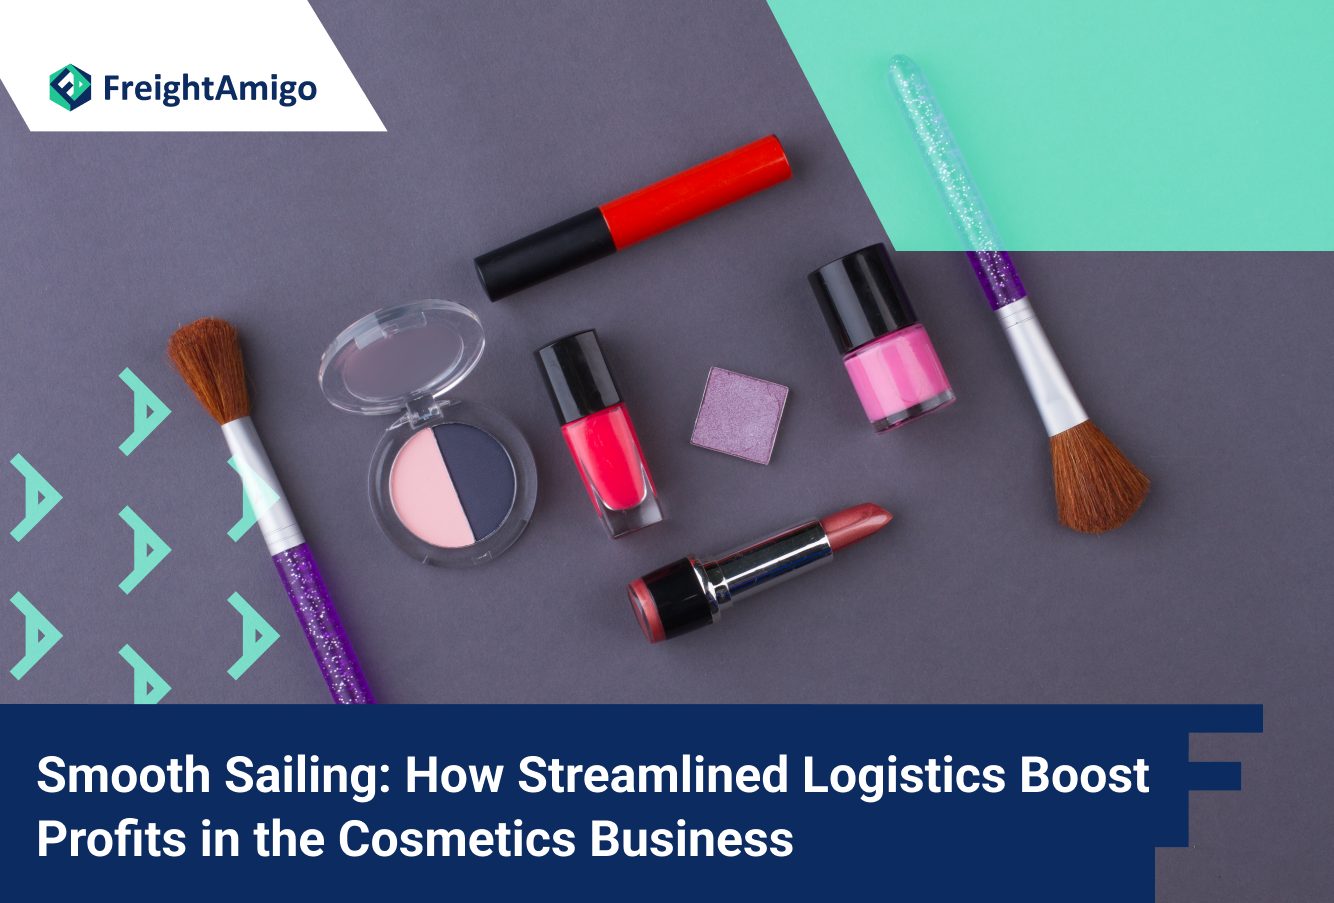 Smooth Sailing: How Streamlined Logistics Boost Profits in the Cosmetics Business